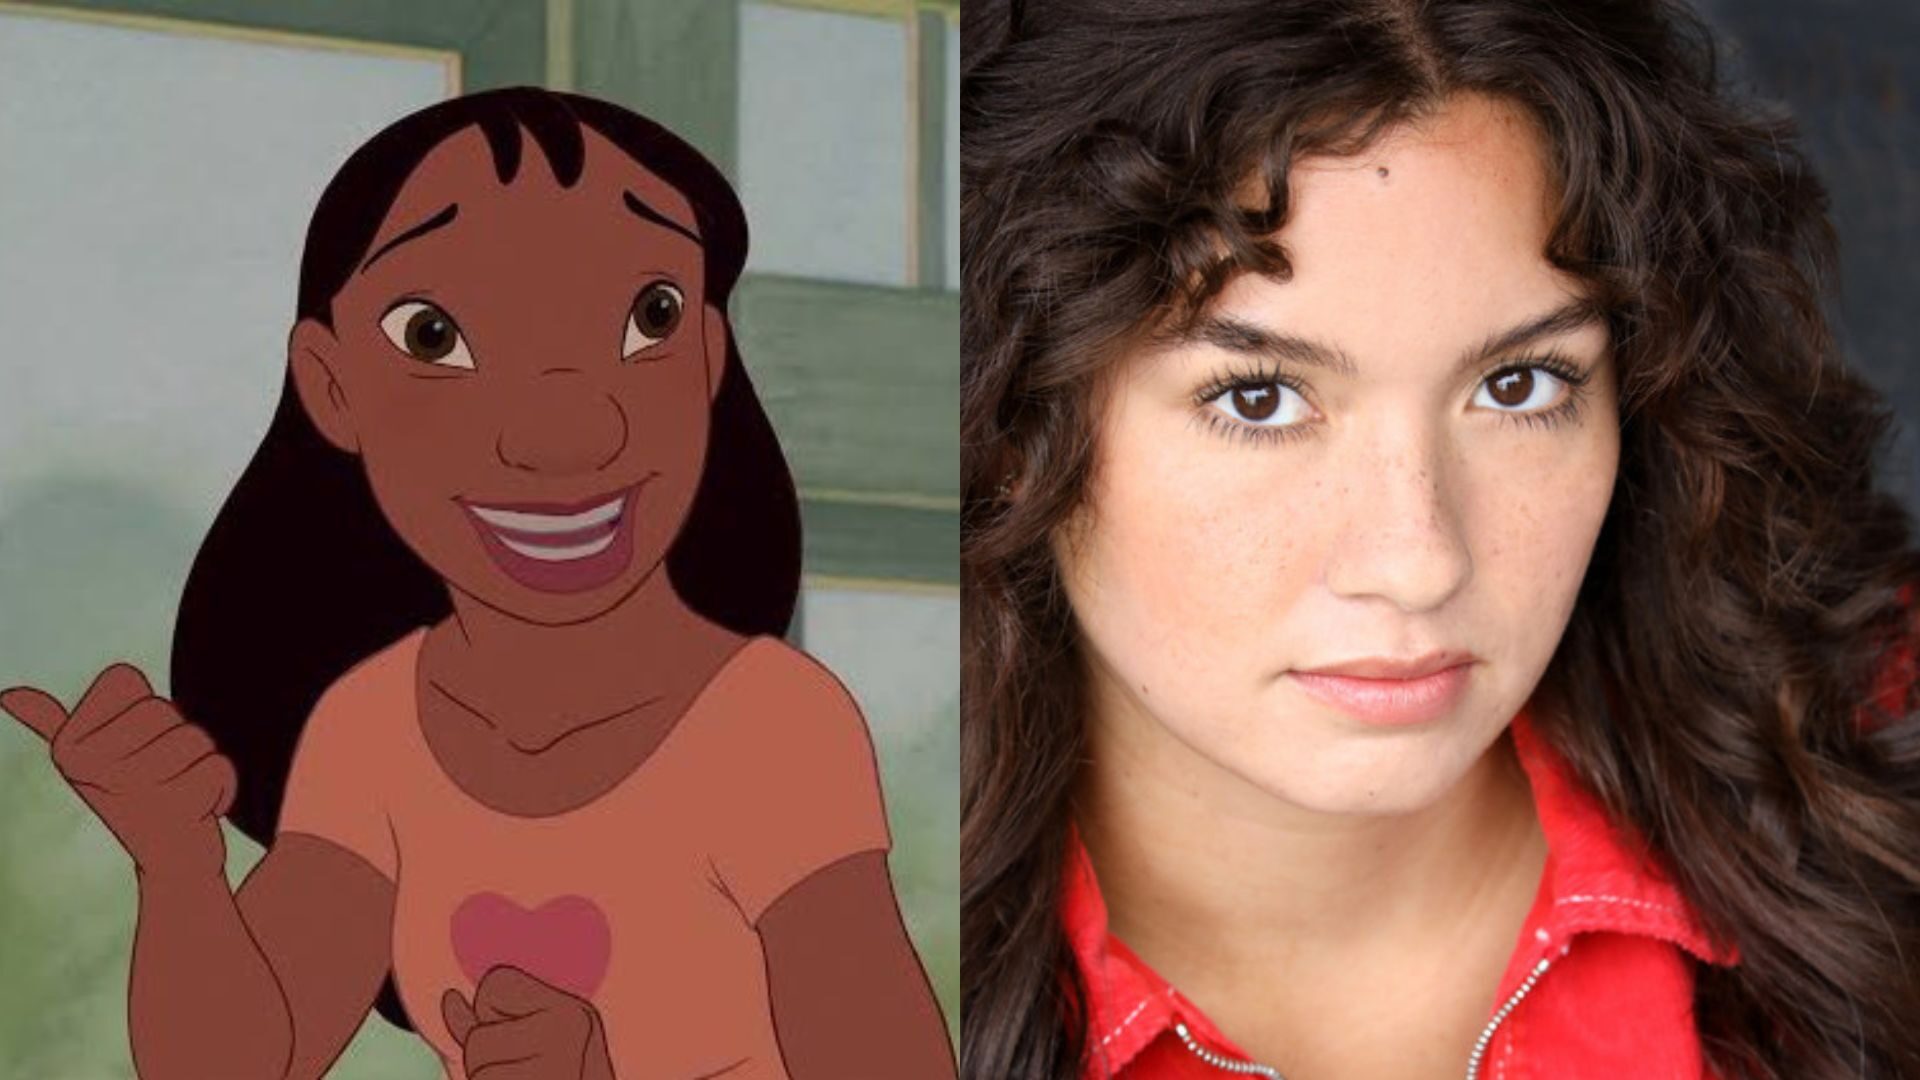 The Live-Action Lilo & Stitch Stirs Up Colorism Controversy